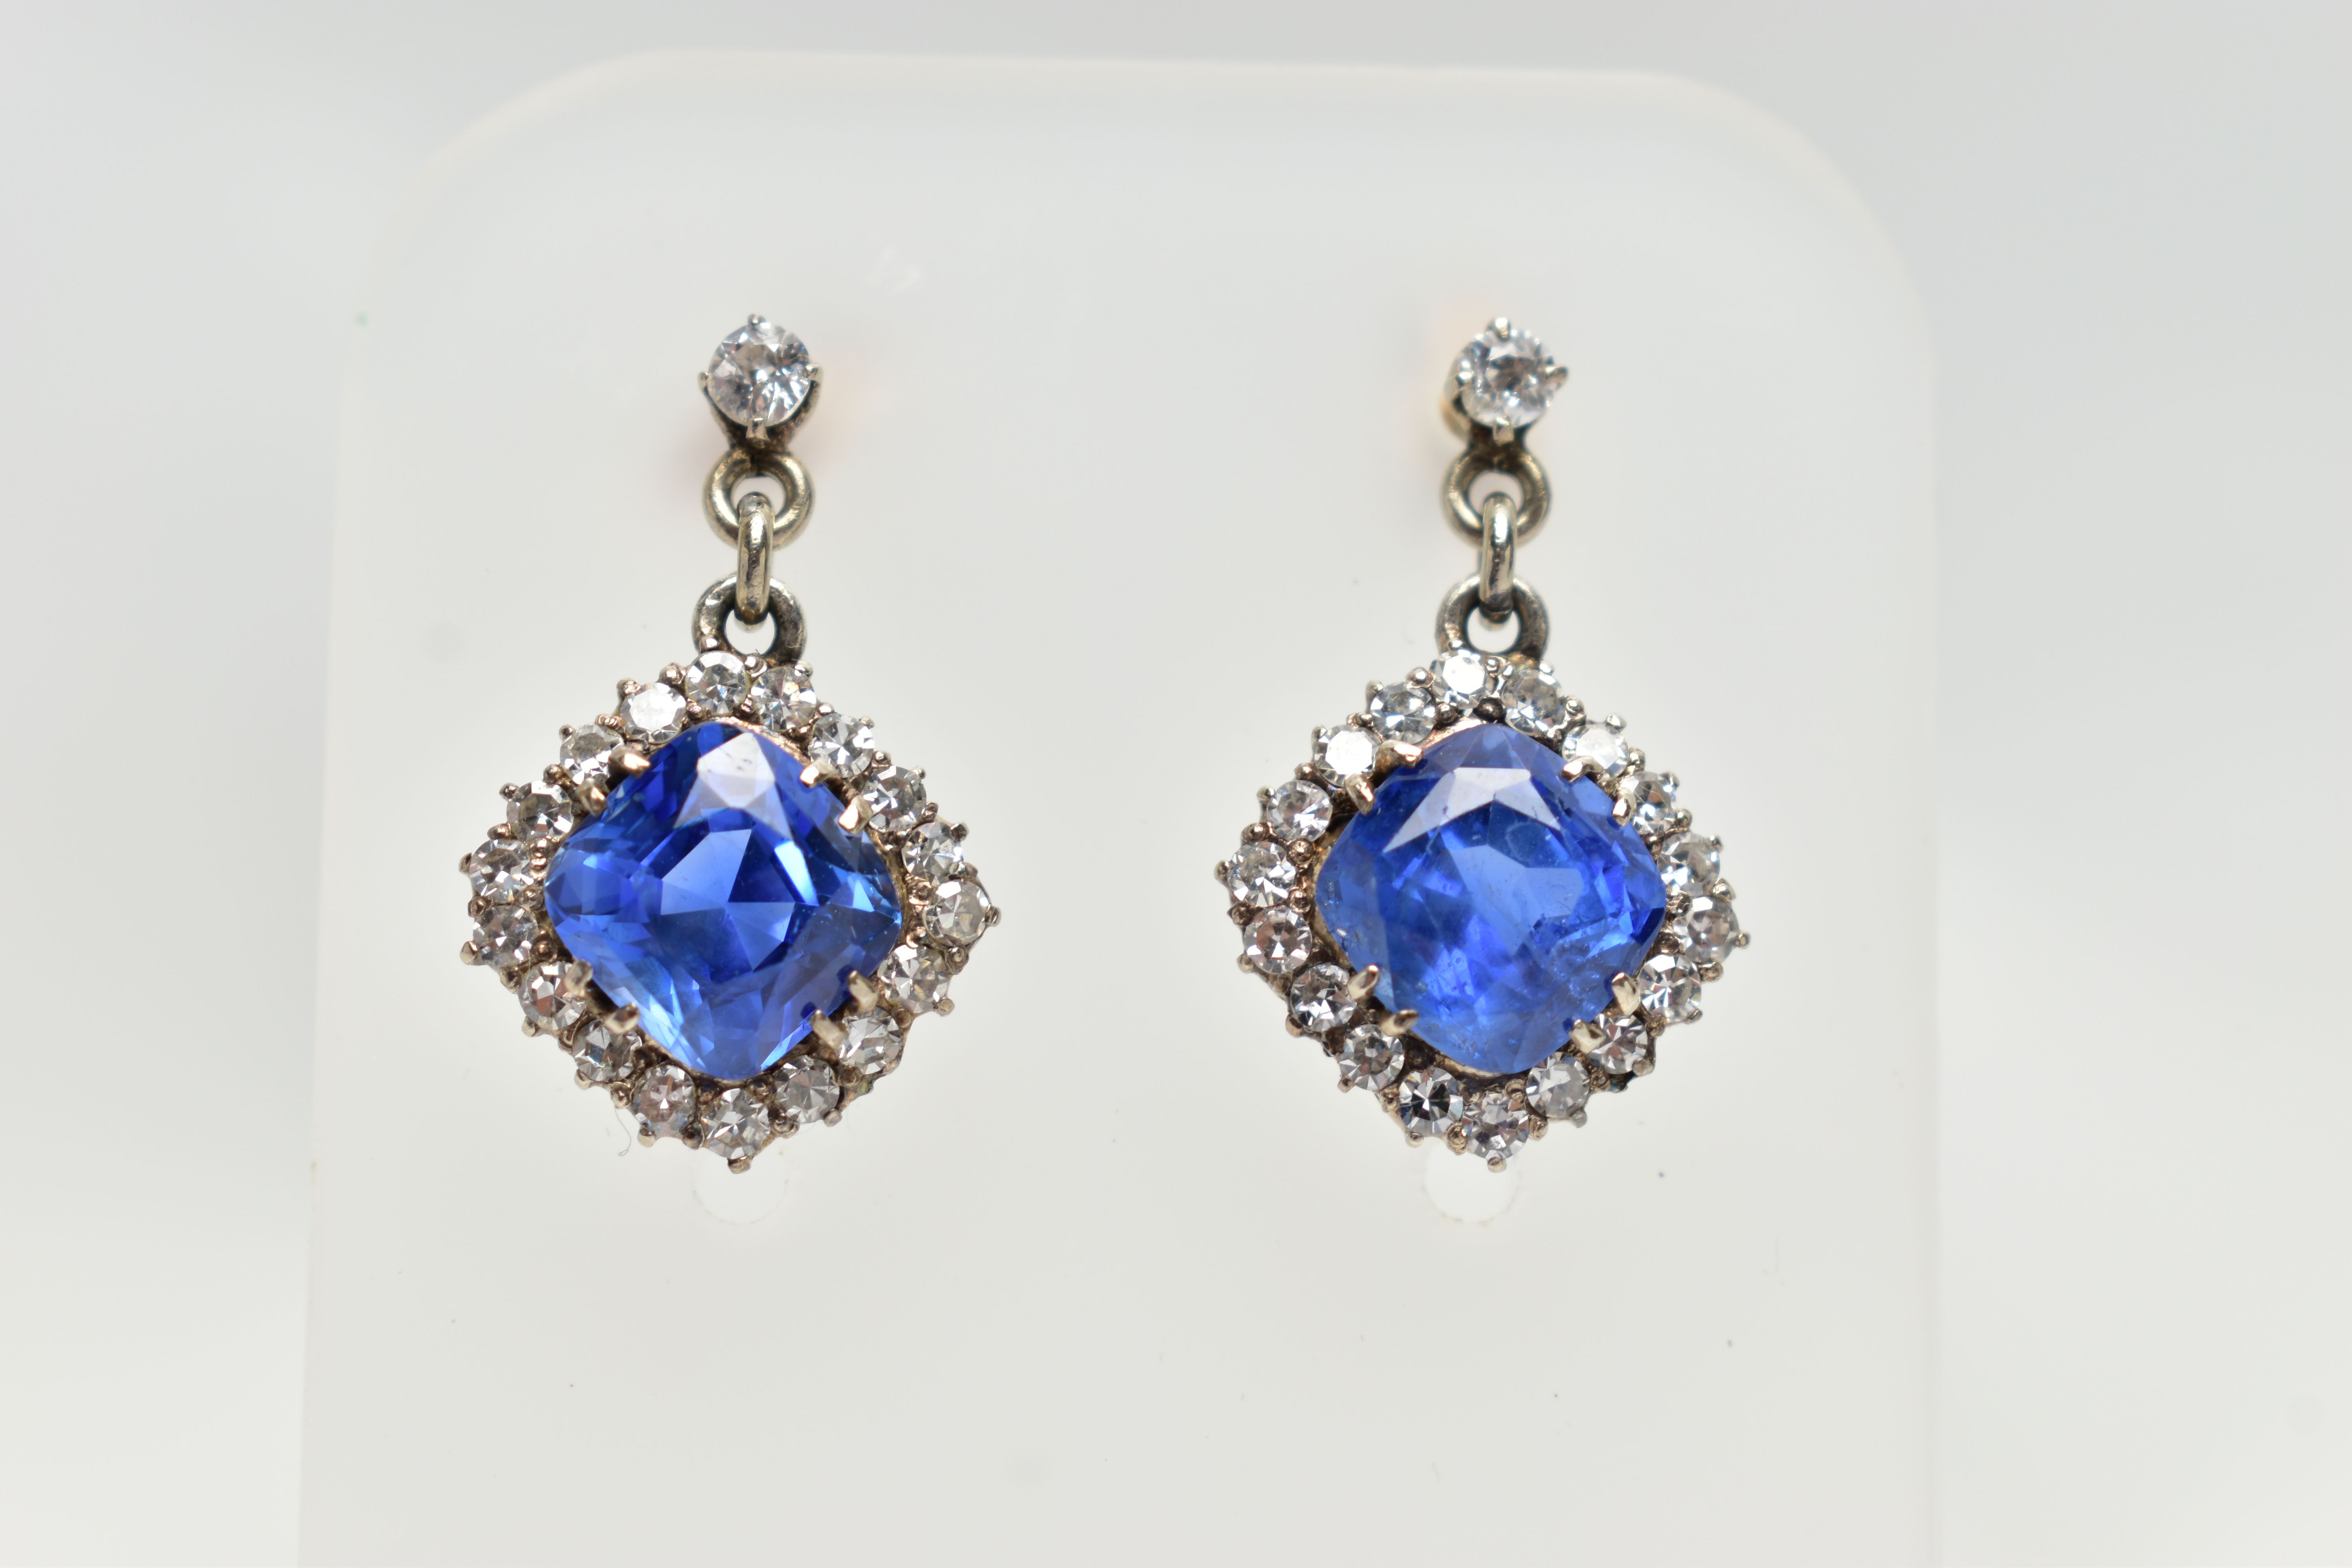 A PAIR OF EARLY 20TH CENTURY SAPPHIRE AND DIAMOND EARRINGS, each earring set with a cushion cut - Image 5 of 11